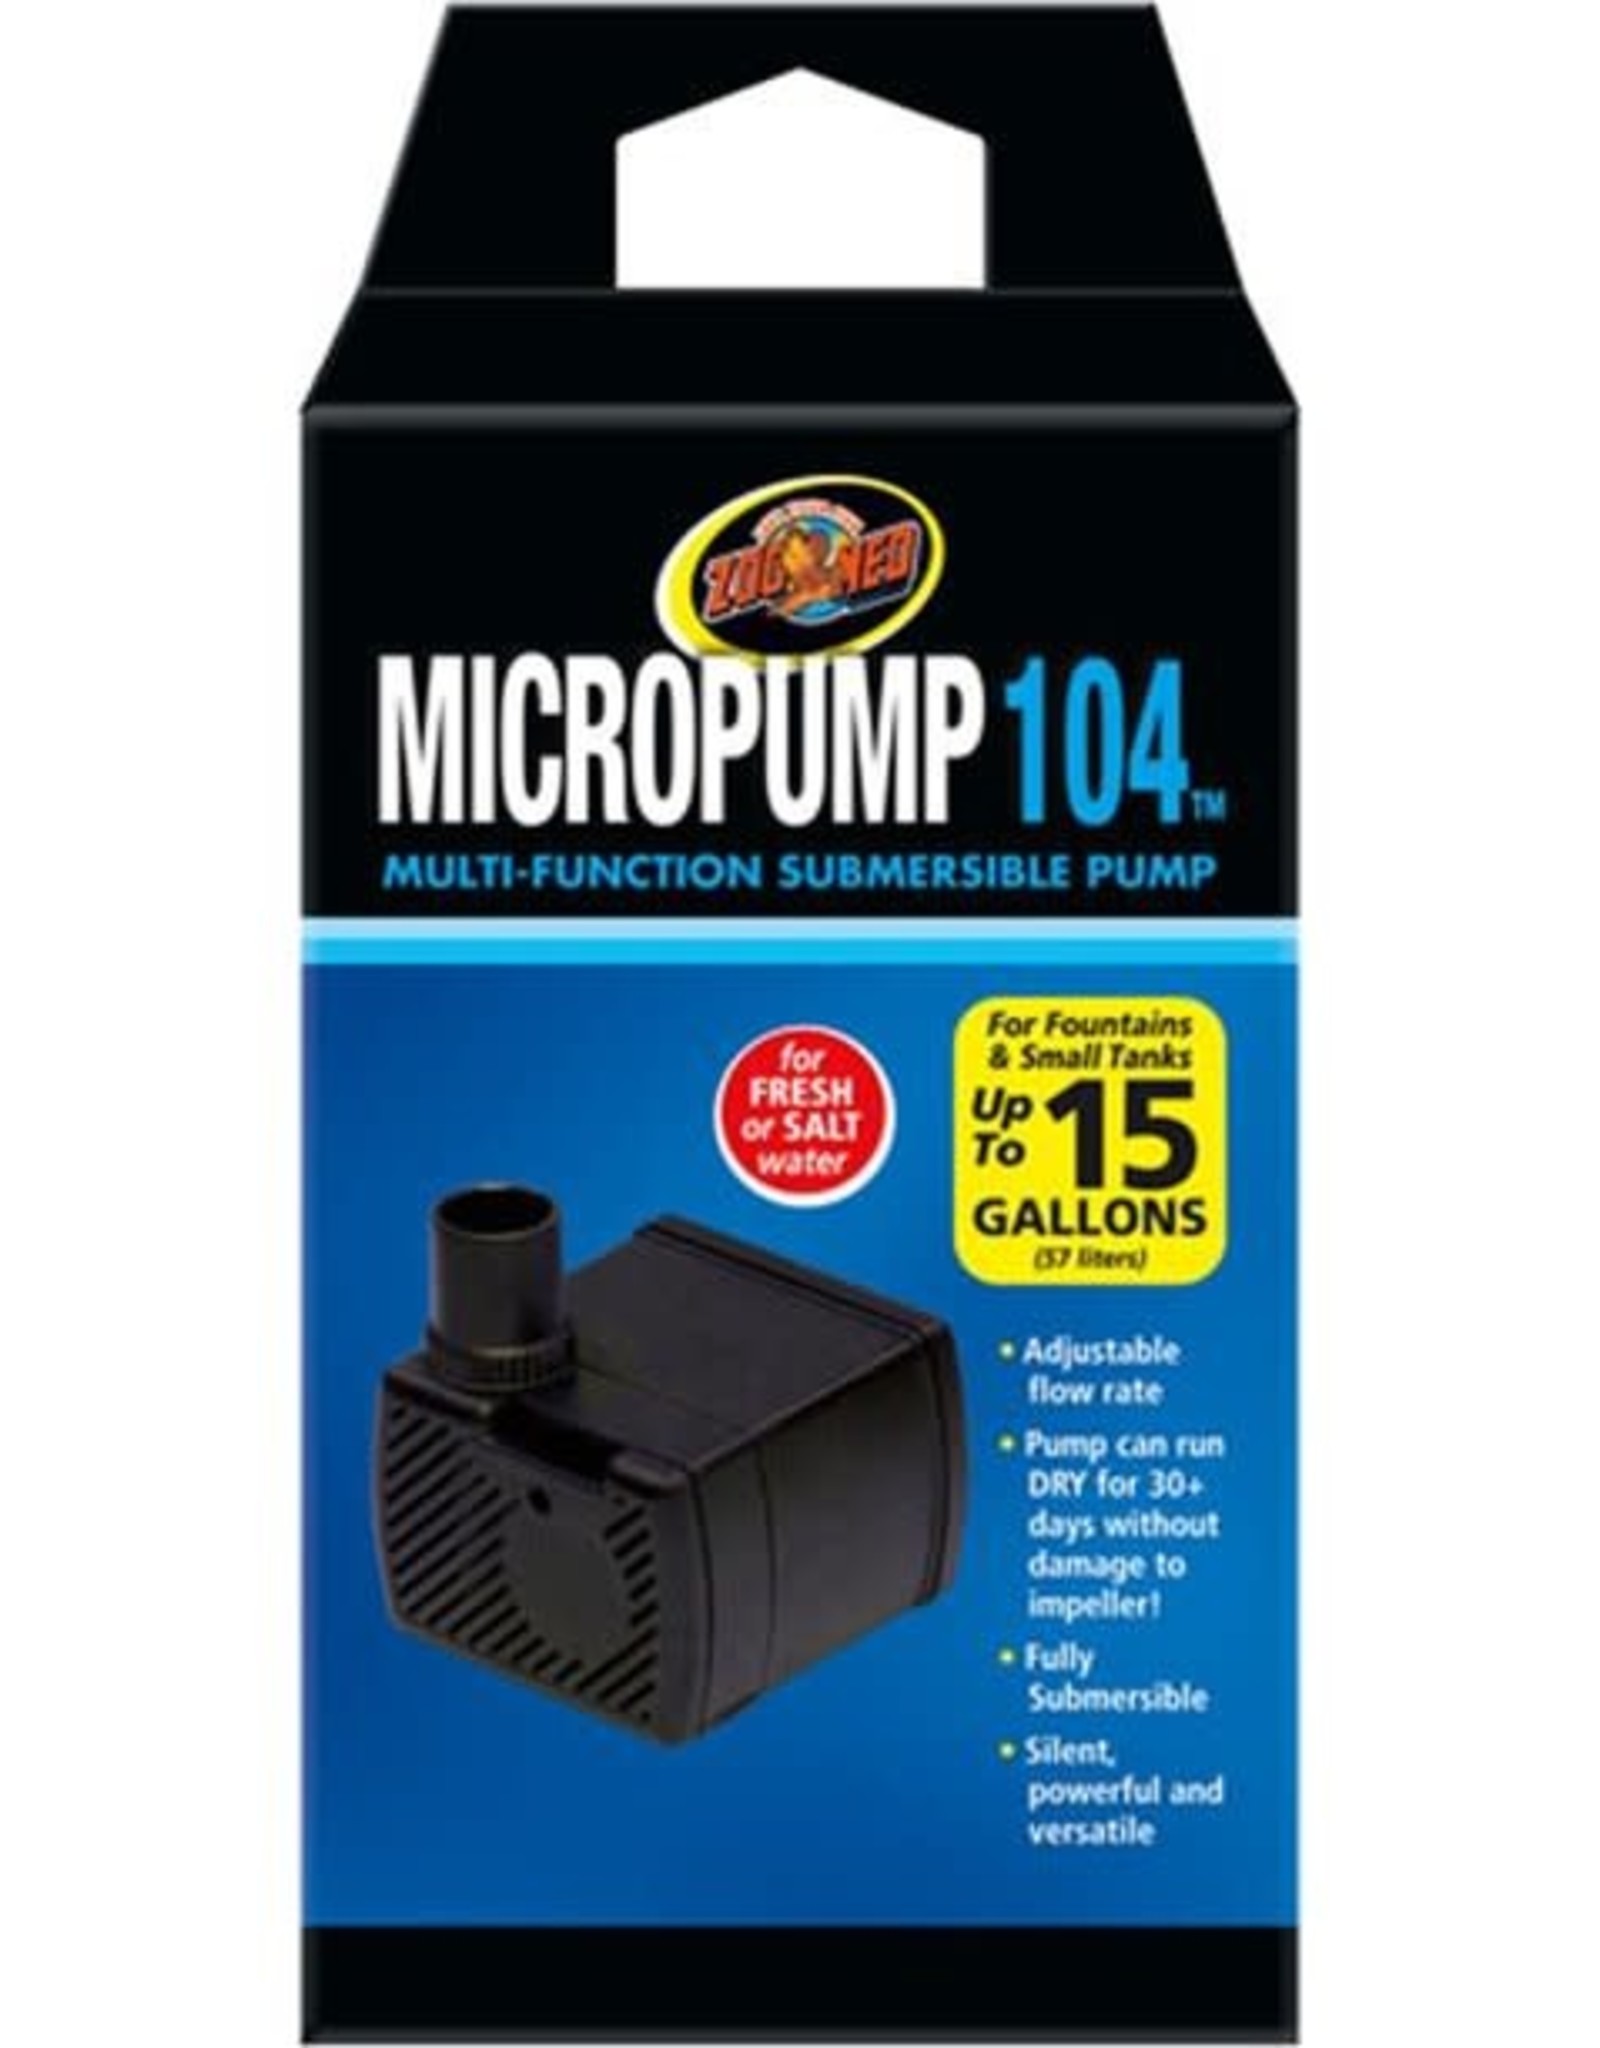 ZOO MED LABORATORIES, INC. ZOO MED- MP-10- MICRO PUMP 104- SUBMERSIBLE- ADJUSTABLE FLOW- 1.50X1.75X1.25